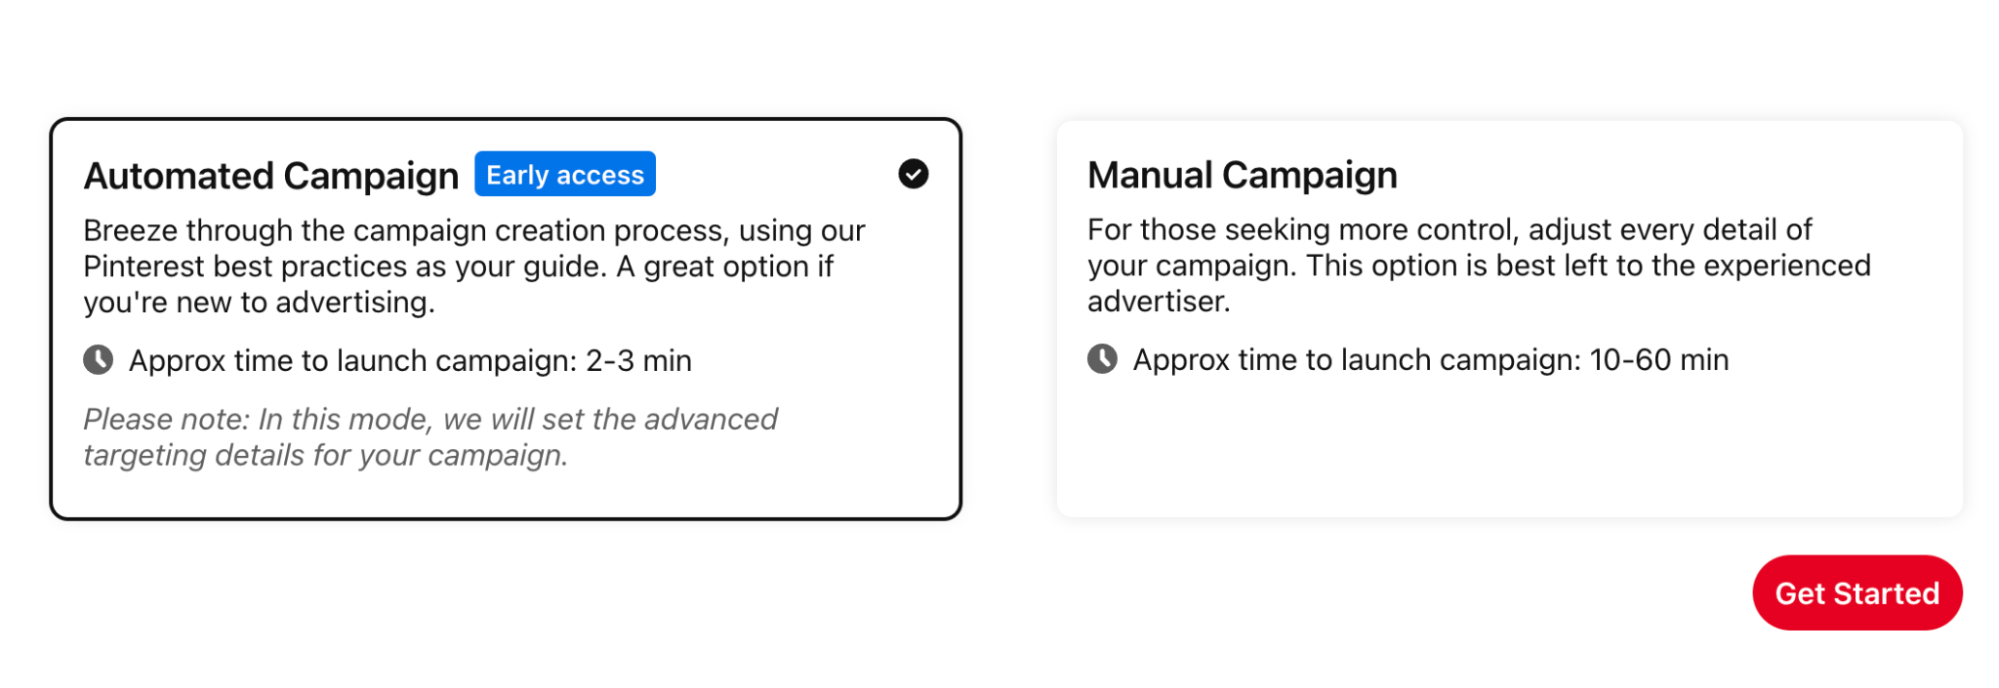 Choosing automated campaign in Pinterest Business dashboard